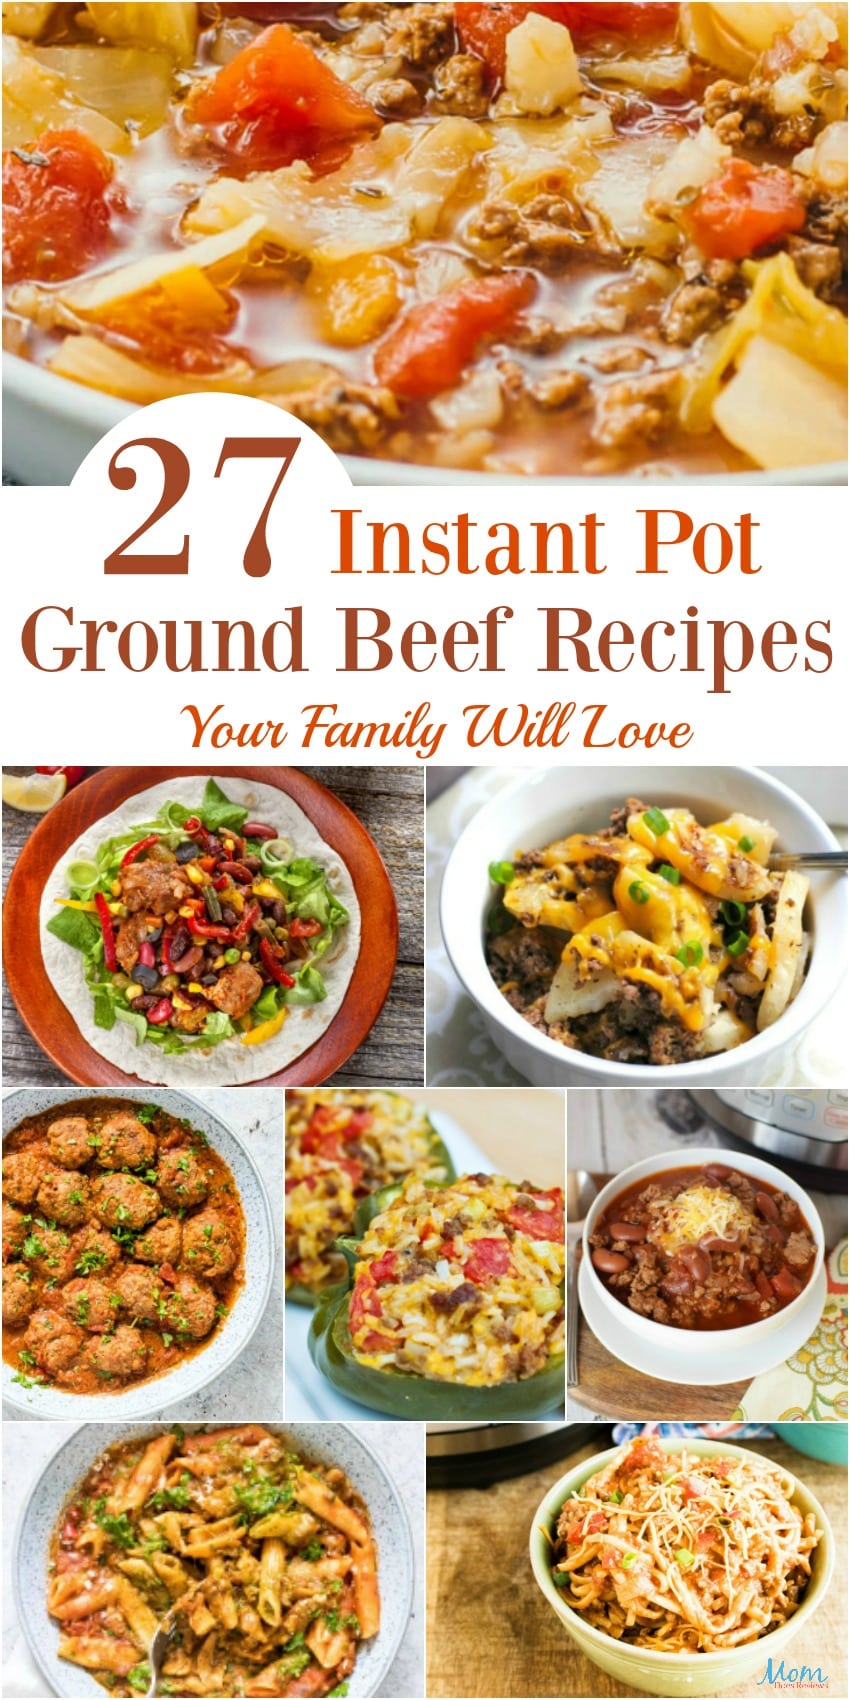 27 Instant Pot Ground Beef Recipes Your Family Will Love #instantpot #recipes #groundbeef #getinmybelly #food 